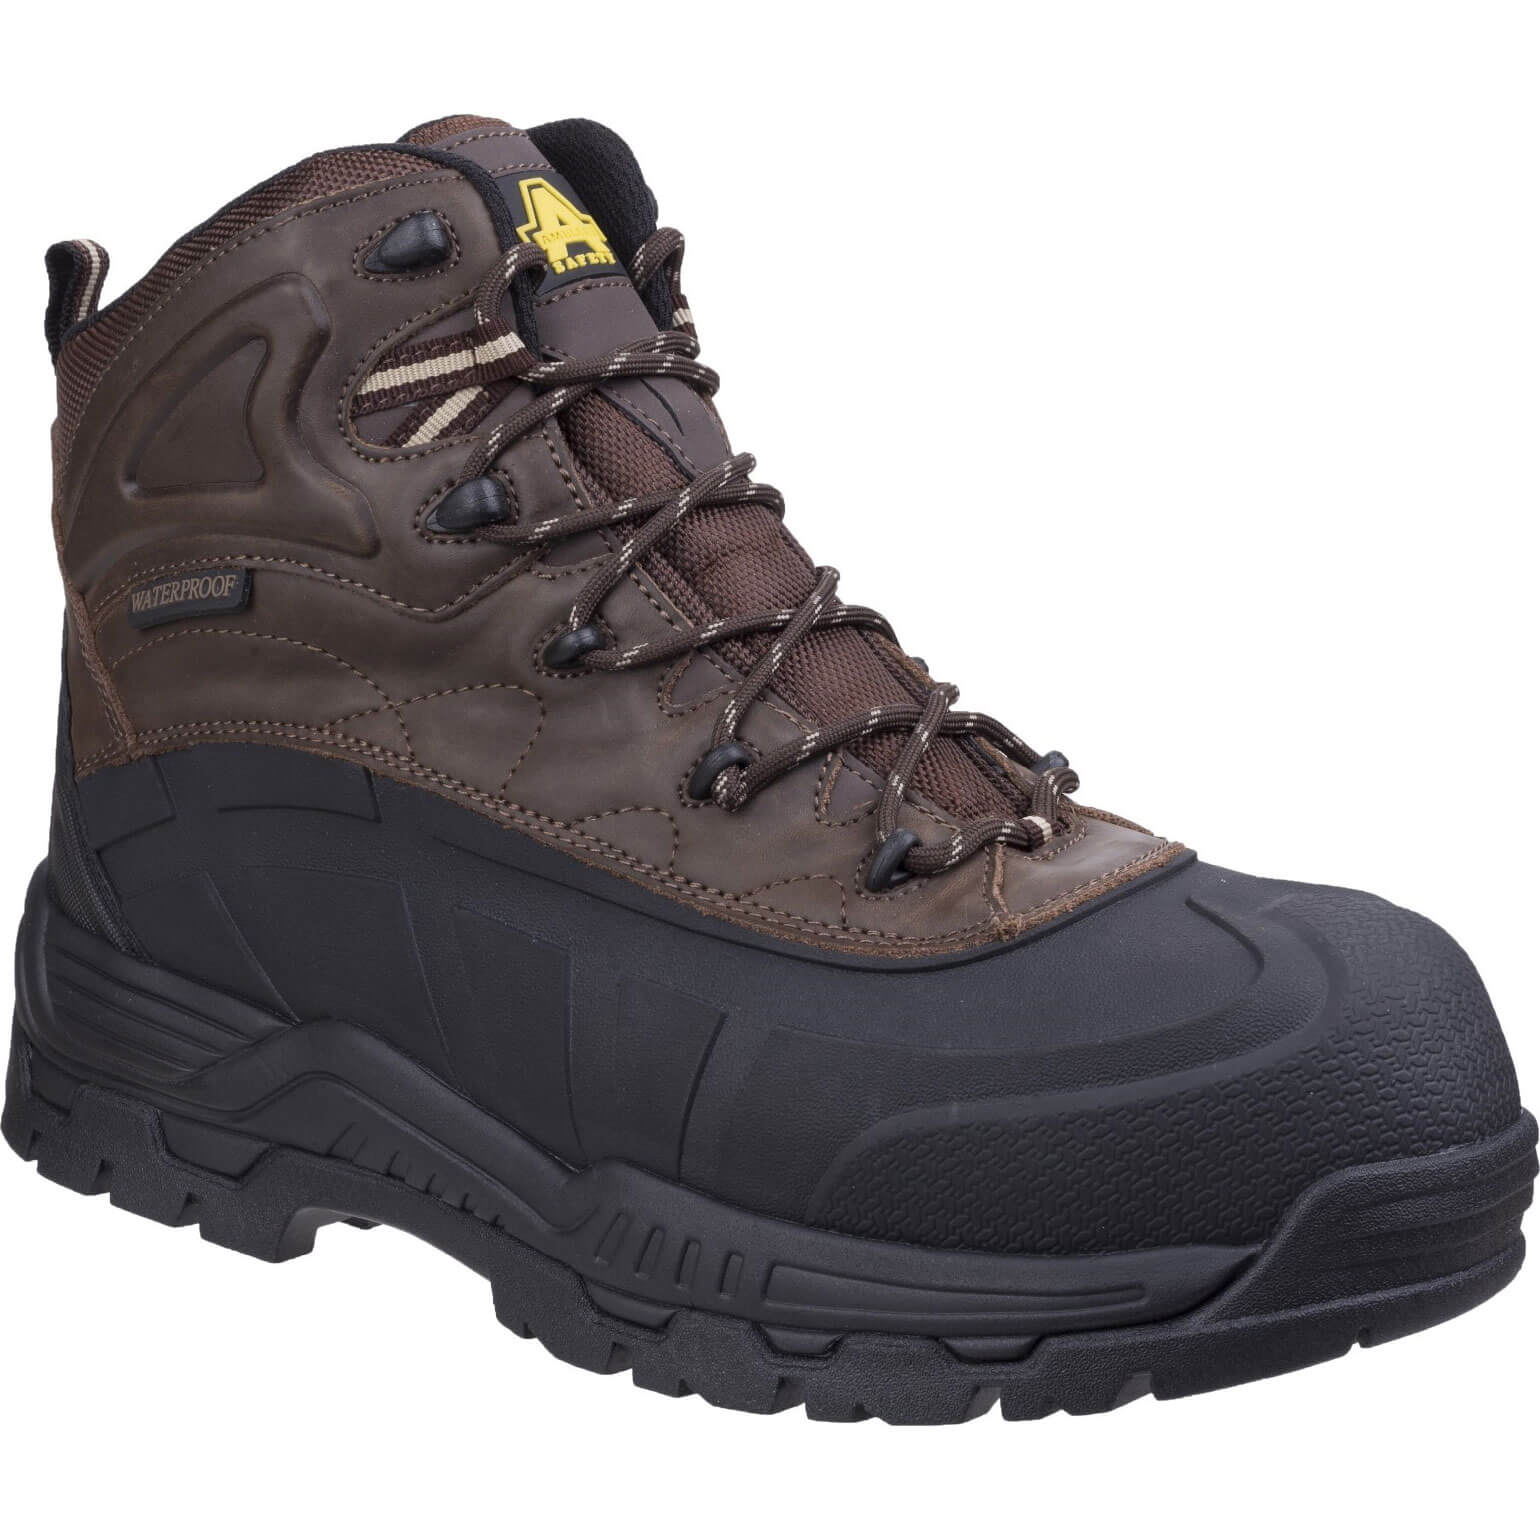 Image of Amblers Safety FS430 Orca Safety Boot Brown Size 11